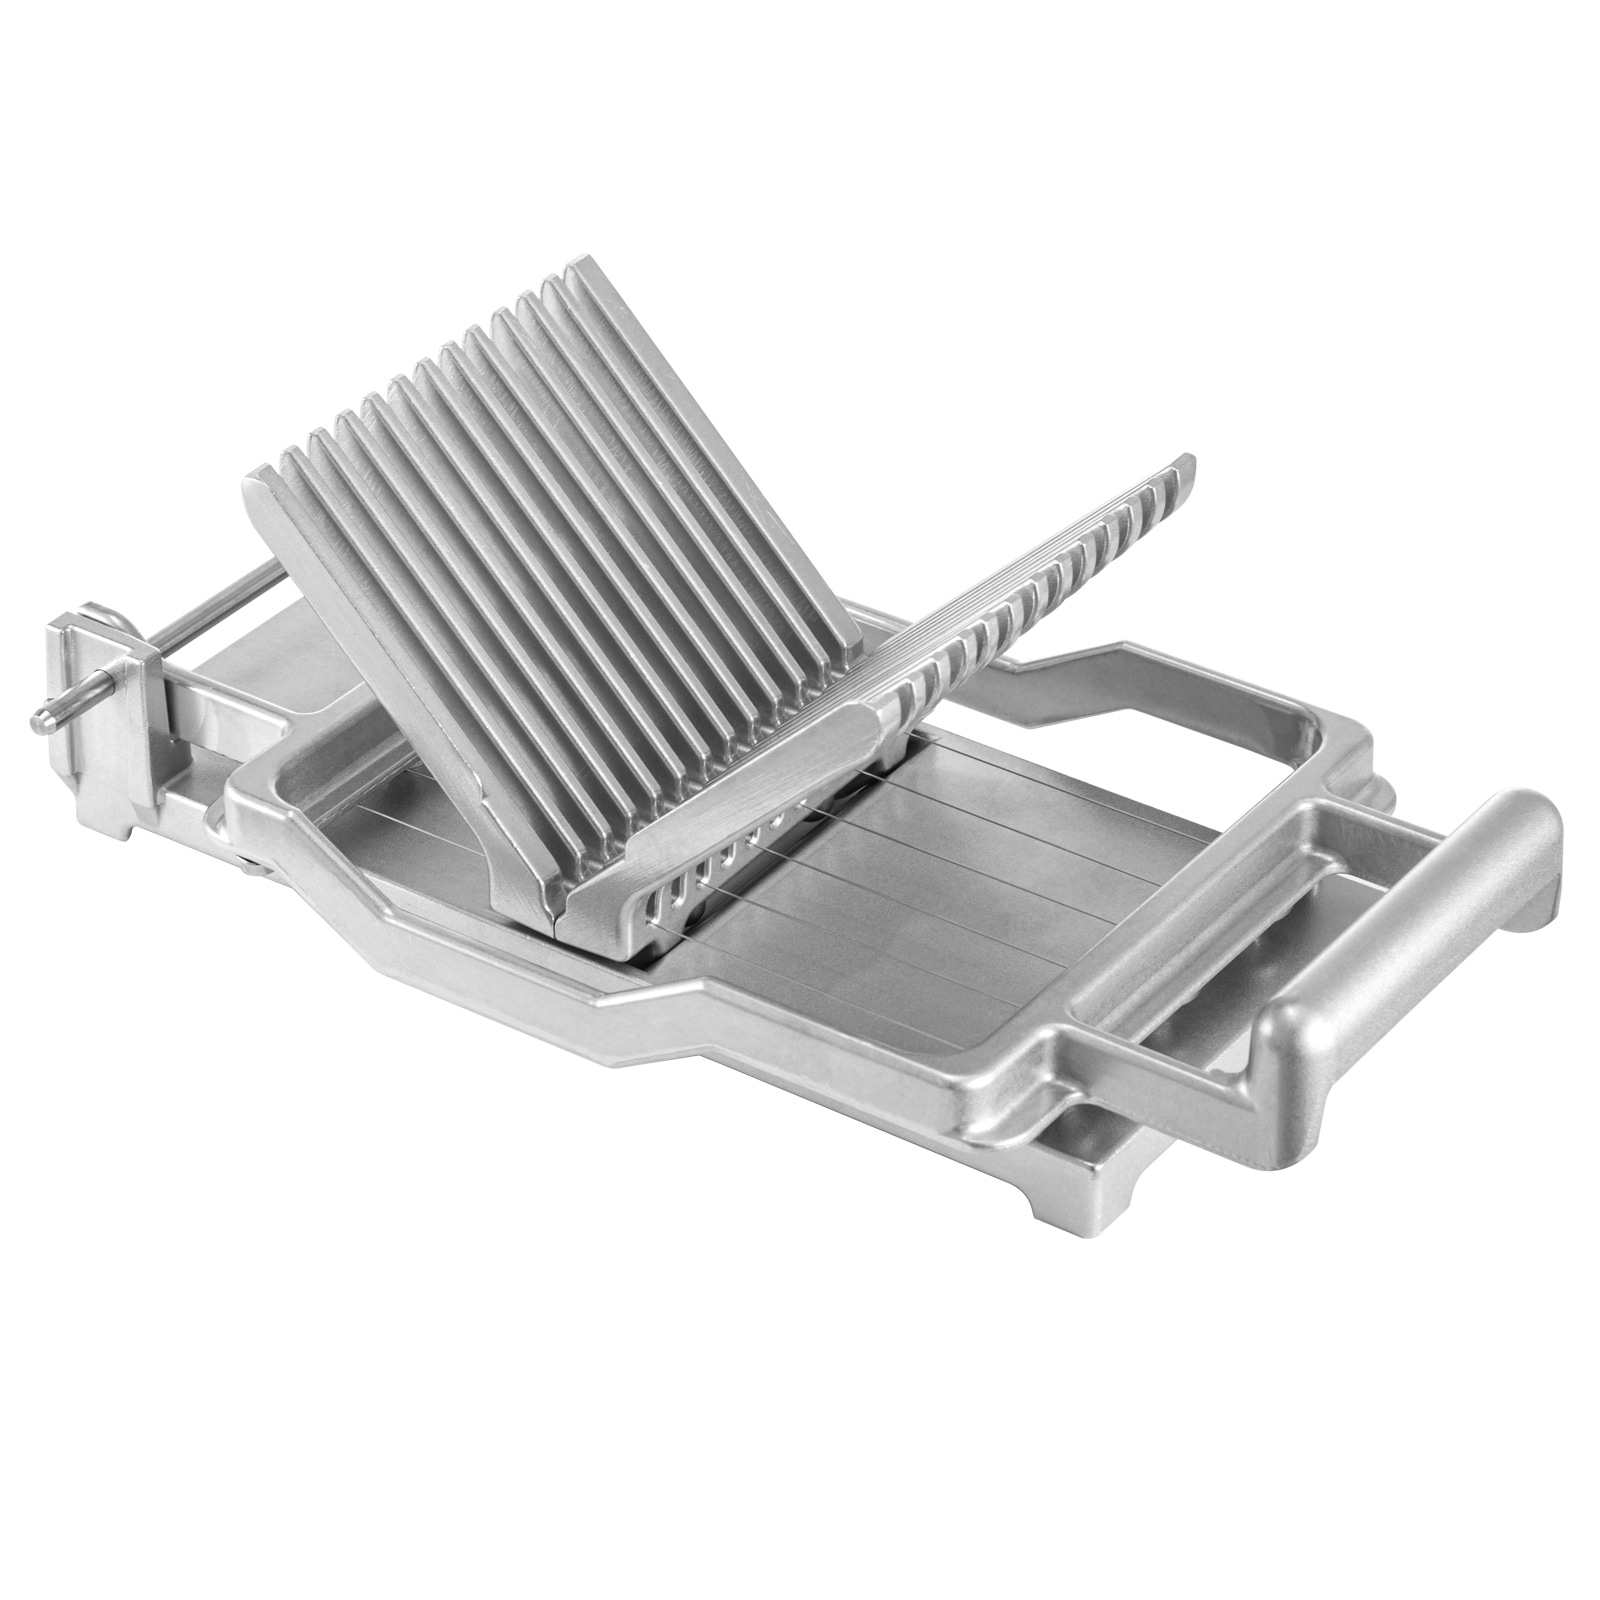 https://ak1.ostkcdn.com/images/products/is/images/direct/9c2ae1595d20aa90a2723f31e71dfdb7826f1b55/VEVOR-Cheese-Cutter-With-Wire-1-cm-%26-2-cm-Cheeser-Butter-Cutting-Blade-Replaceable-Cheese-Slicer-Wire.jpg